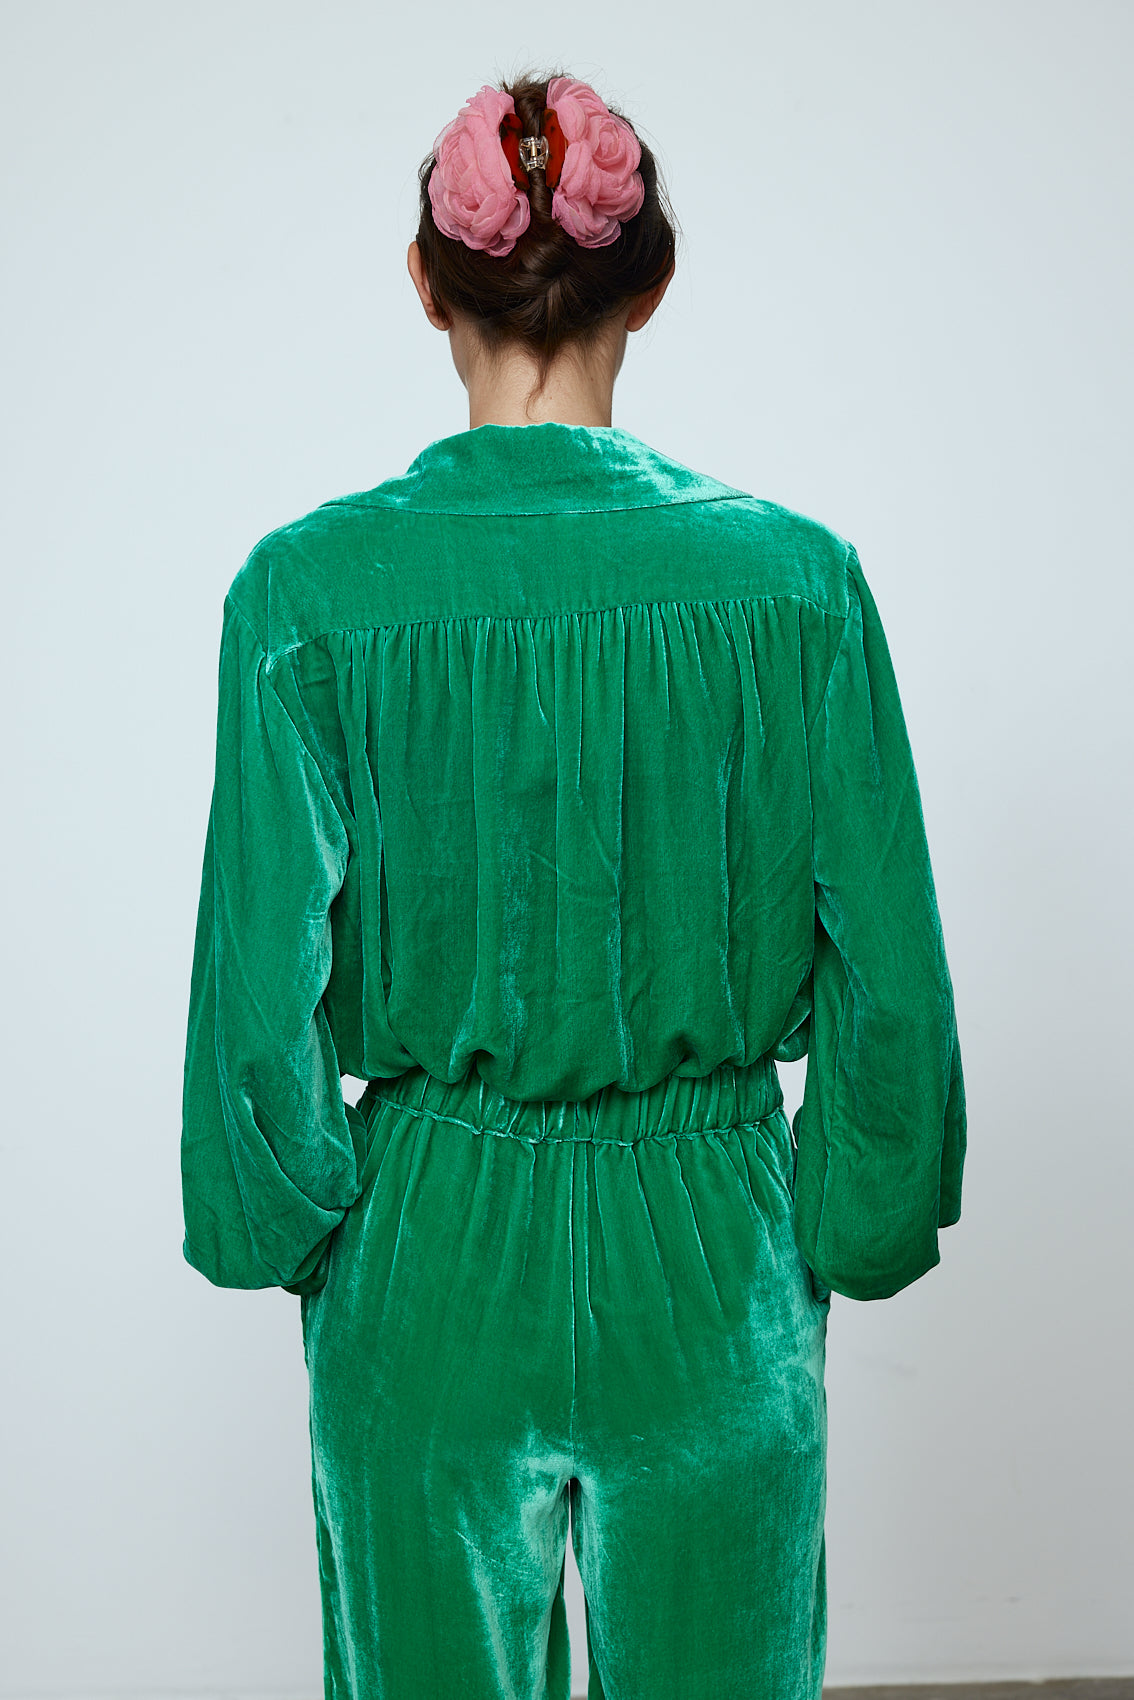 The Bonsai Shirt is made in a luxurious silk velvet fabric with a heavy fall and a deep emerald green color. The Shirt features long draped sleeves, a deep-cut oversized shirt collar, and buttons on the front.   Style it with jeans and a colorful belt, or match it with the Elisabeth Pants in emerald green Silk Velvet for parties, dinners, and special occasions.    Material: 20% silk, 80% viscose.  The model is 179cm (5'10") and wears size S.